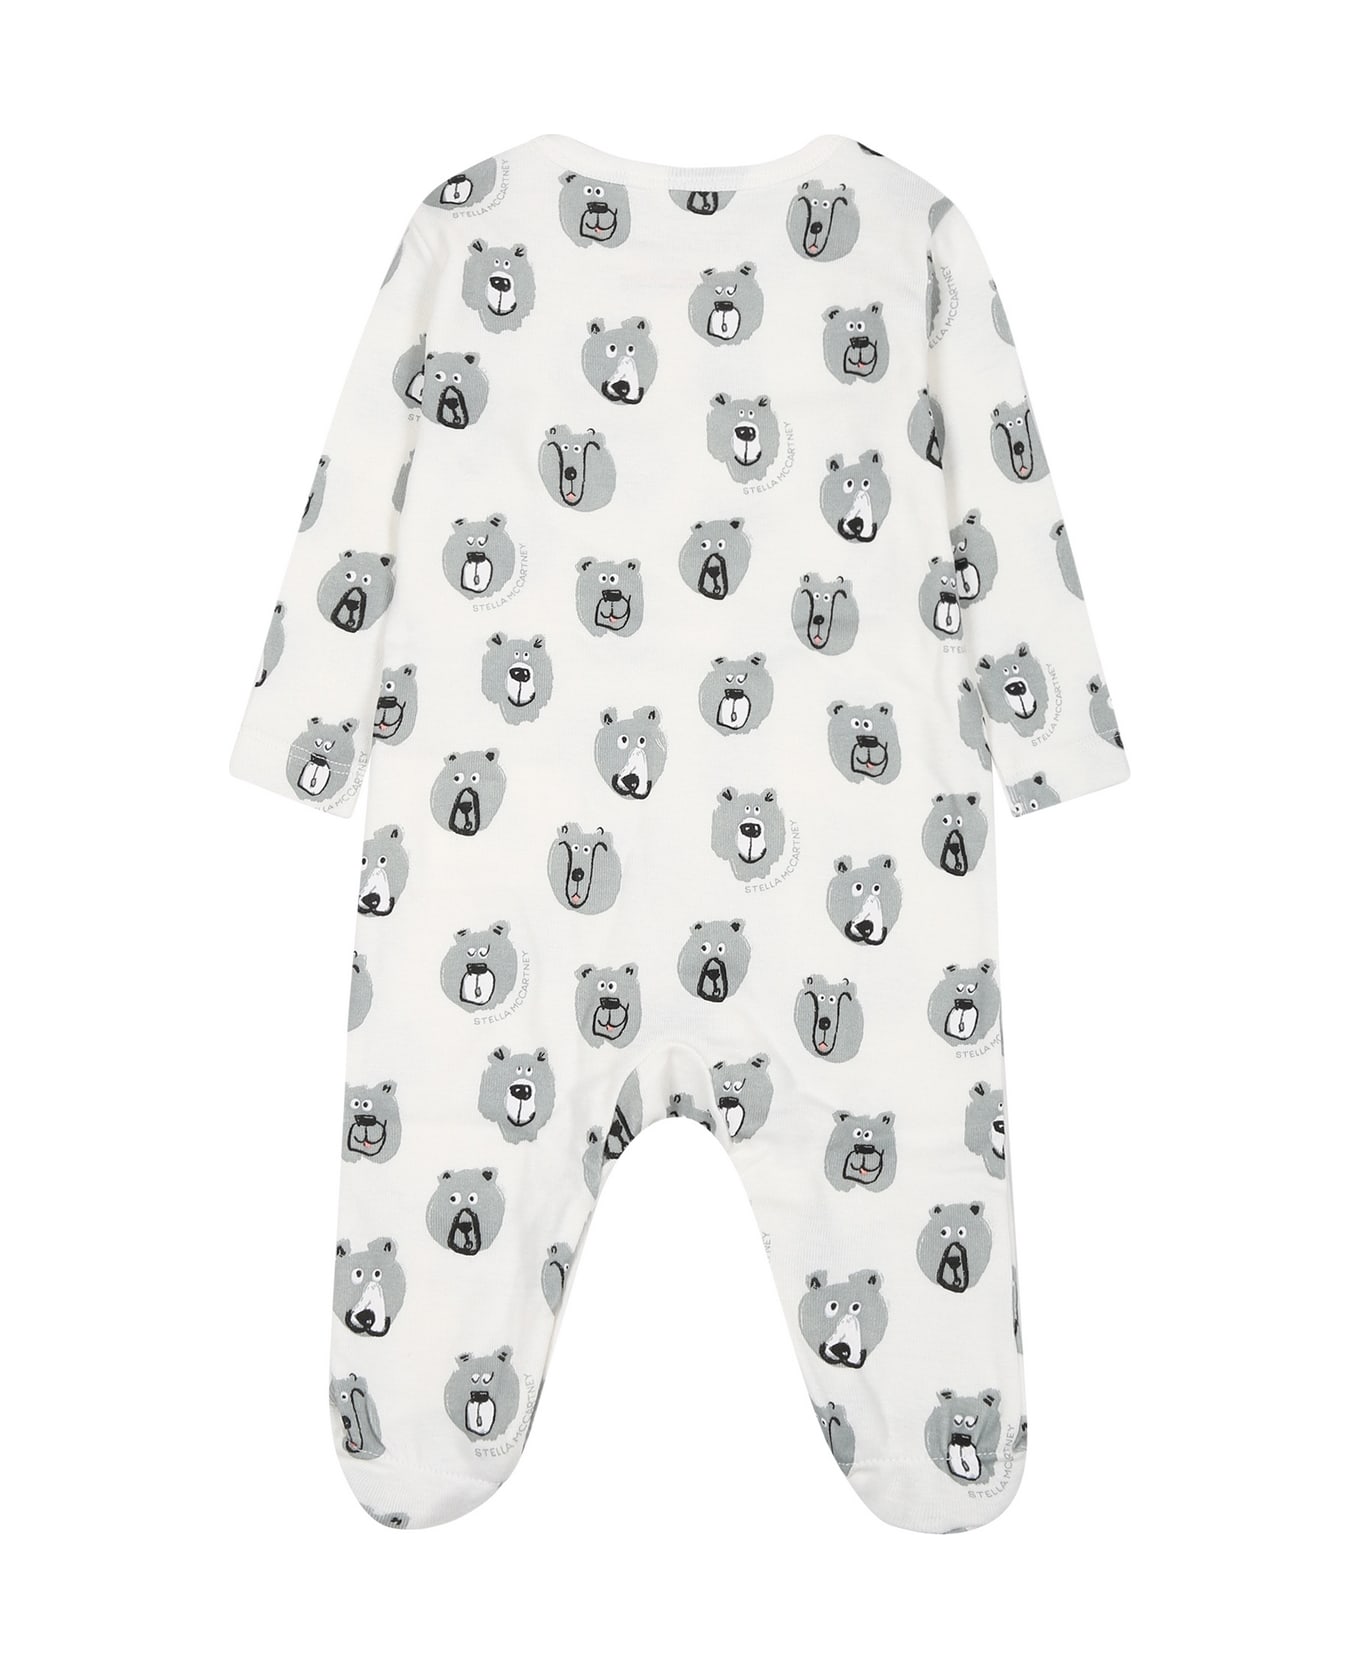 Stella McCartney Kids White Set For Baby Boy With Printed Bear - White ボディスーツ＆セットアップ